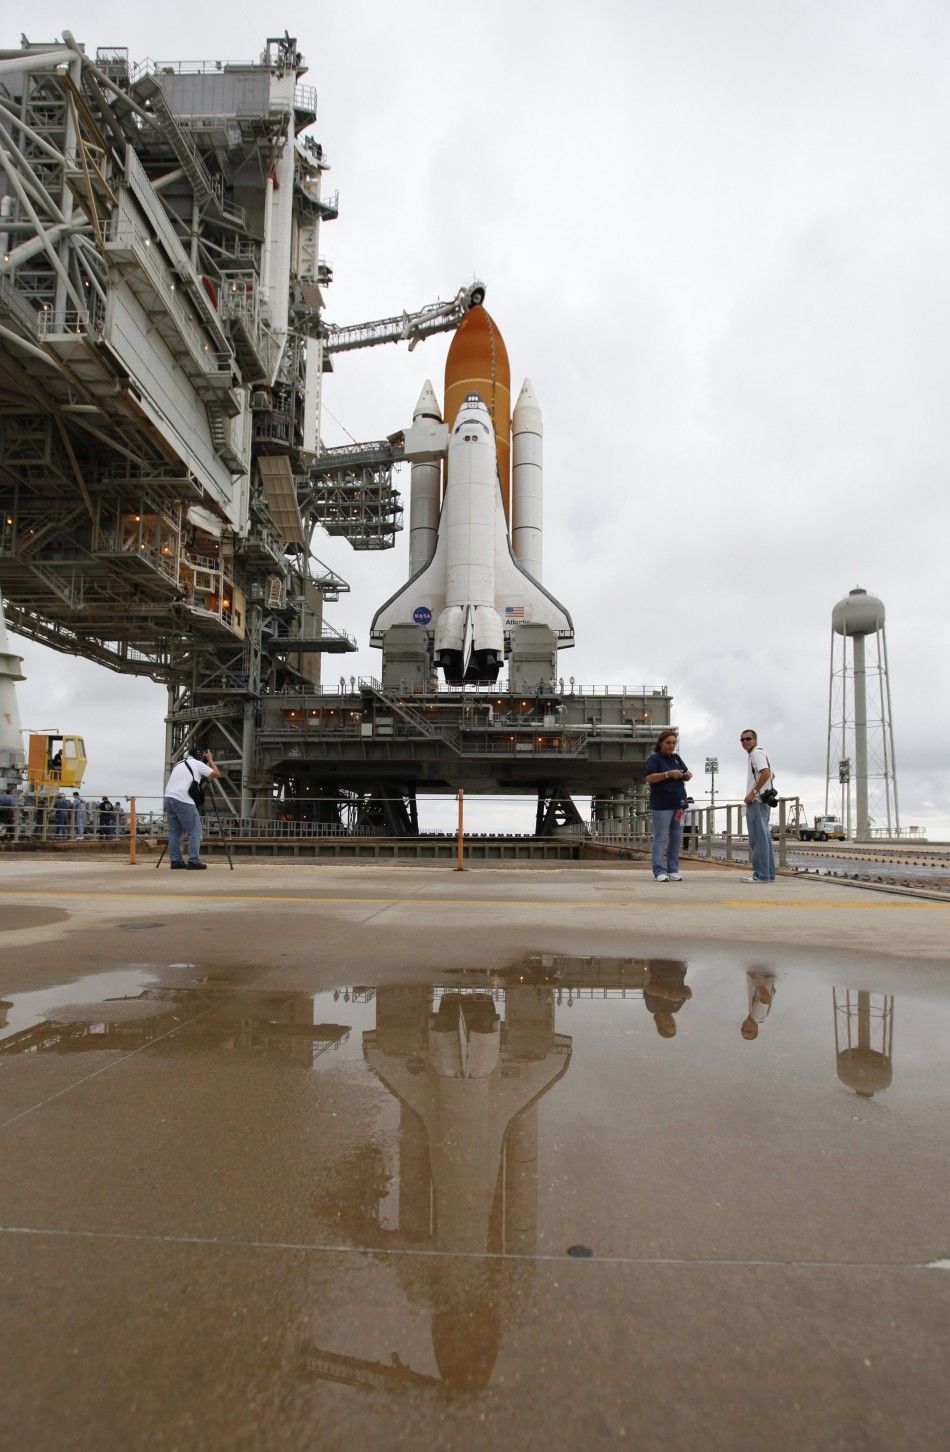 The space shuttle Atlantis is shown on launch pad 39A after the Rotating Service Structure was rolled back at the Kennedy Space Center in Cape Canaveral